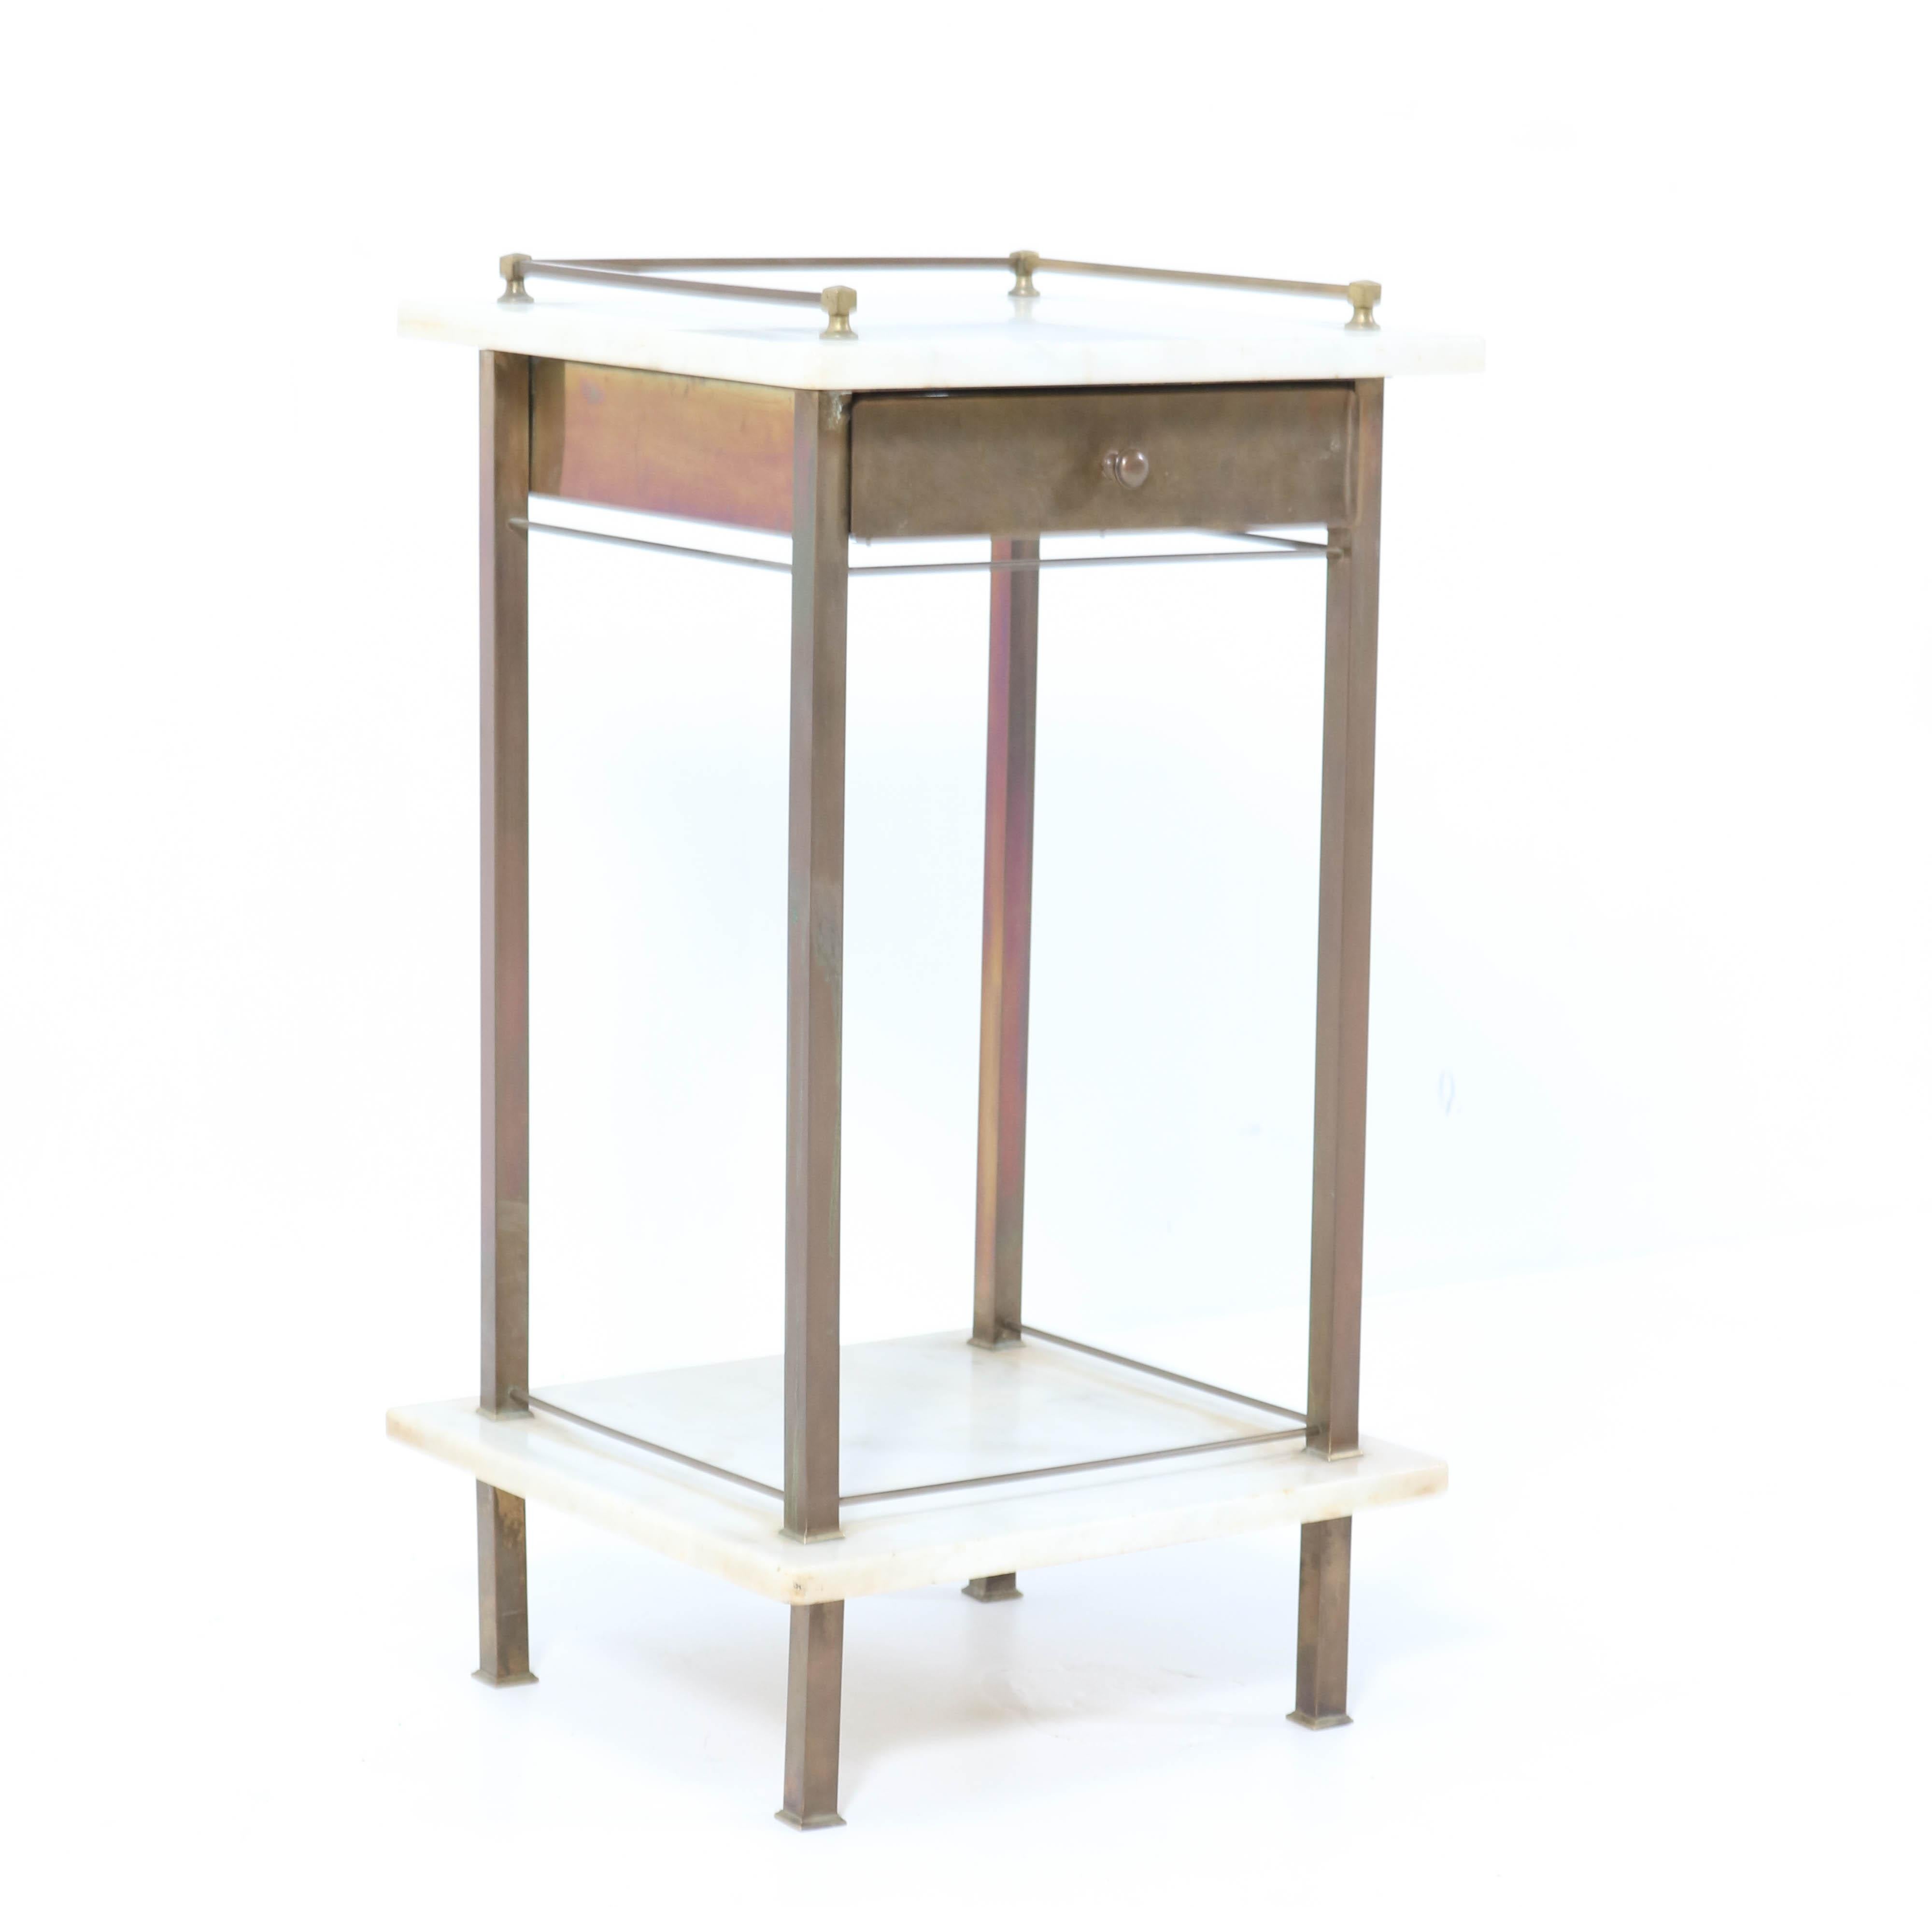 Early 20th Century Brass Vienna Secession Nightstand or Bedside Table with Marble Top, 1900s